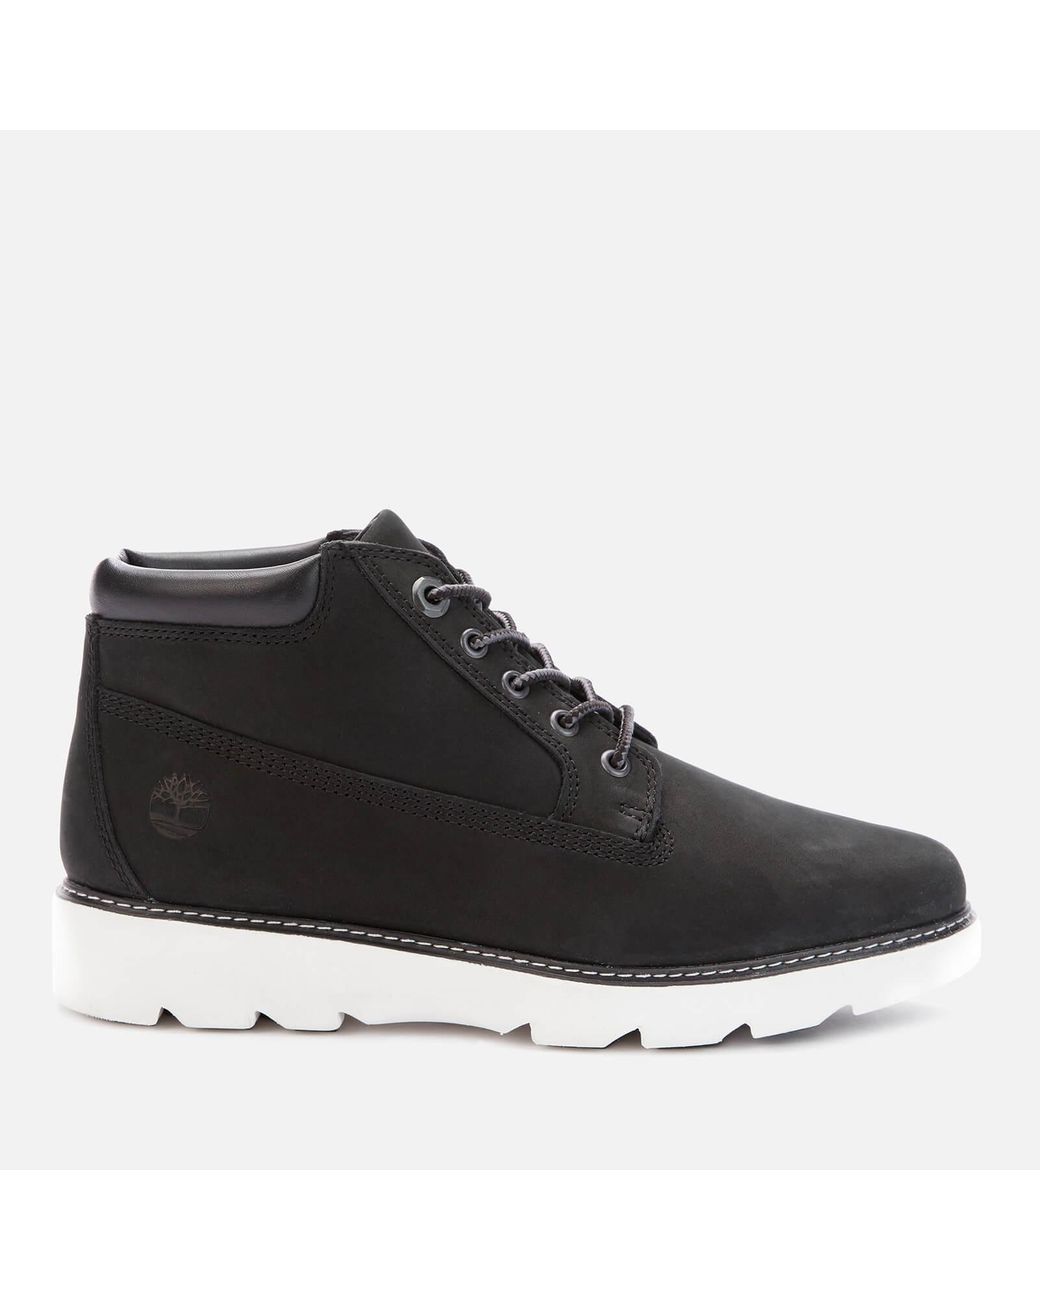 Timberland Leather Keeley Field Nellie Nubuck Boots in Black | Lyst